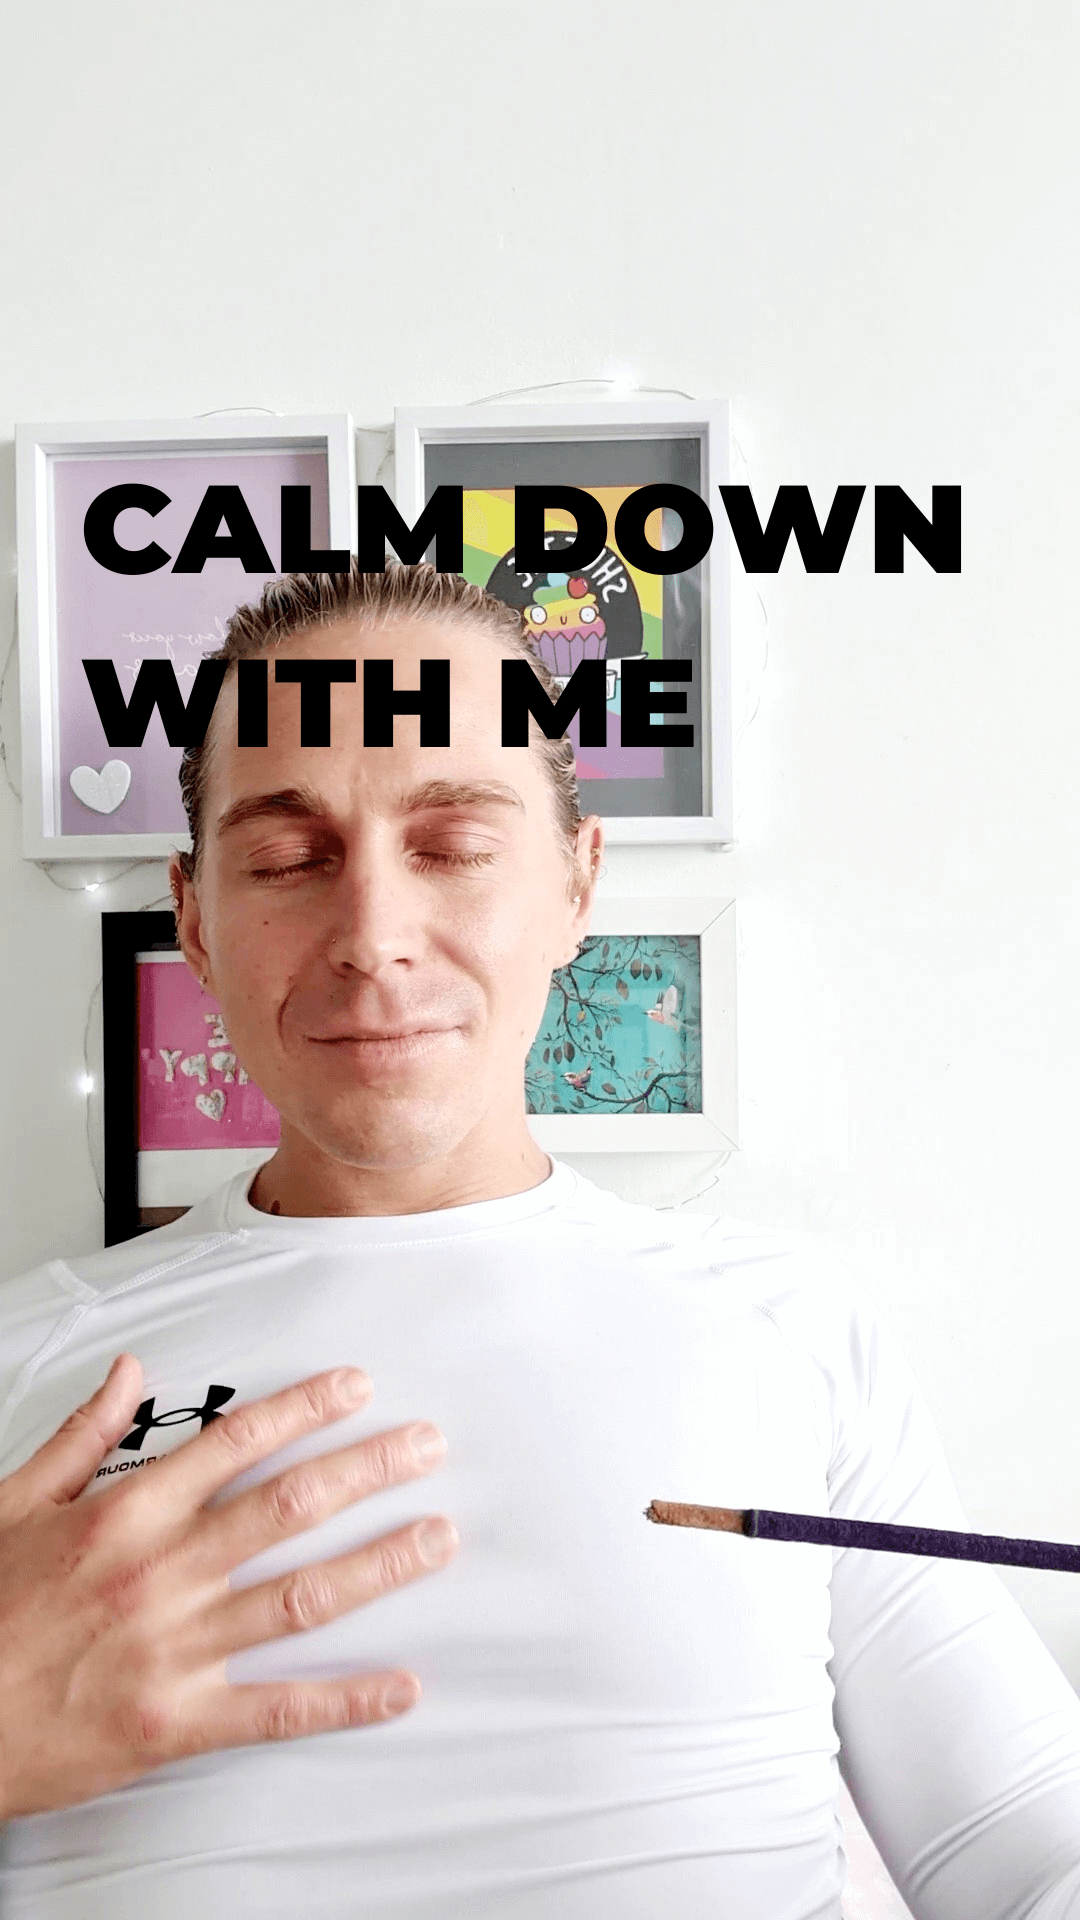 James Kearslake, owner of LGBTQ Wellness, delivering a simple meditative breathwork pattern to help calm us down